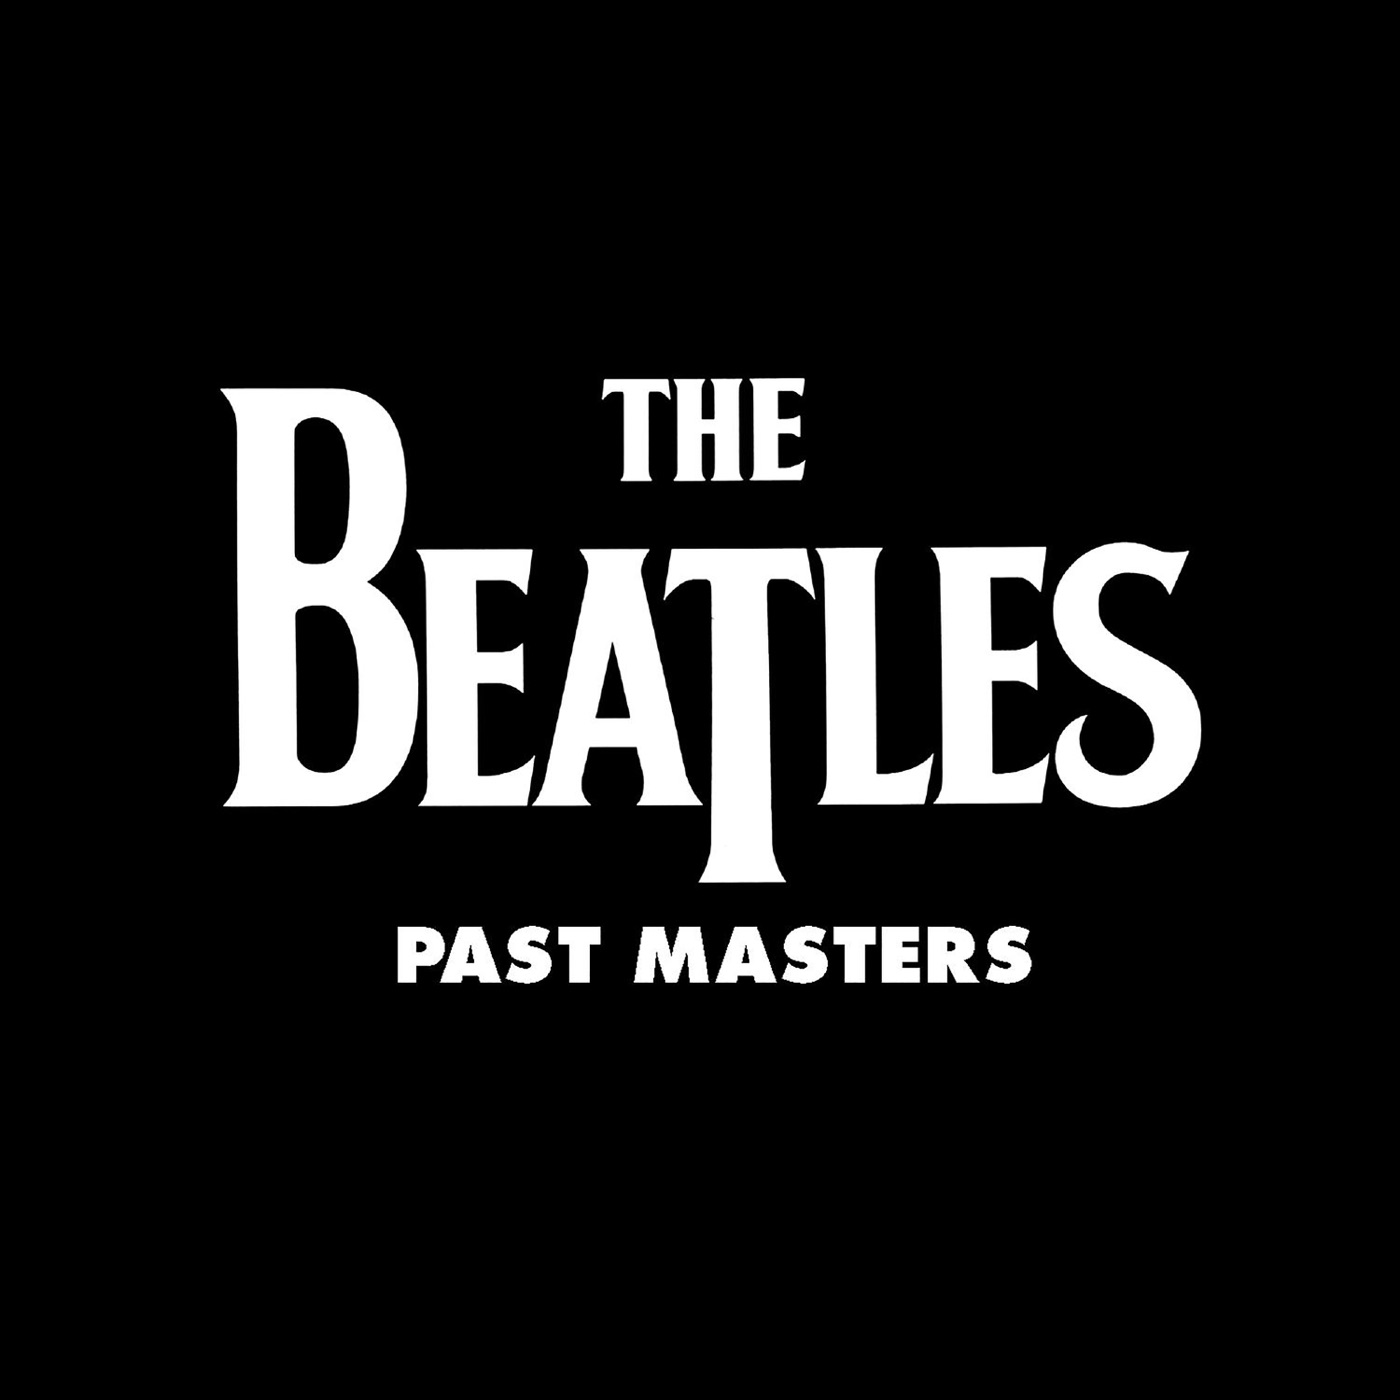 You Know My Name (Look Up The Number) (Remastered 2009) by The Beatles